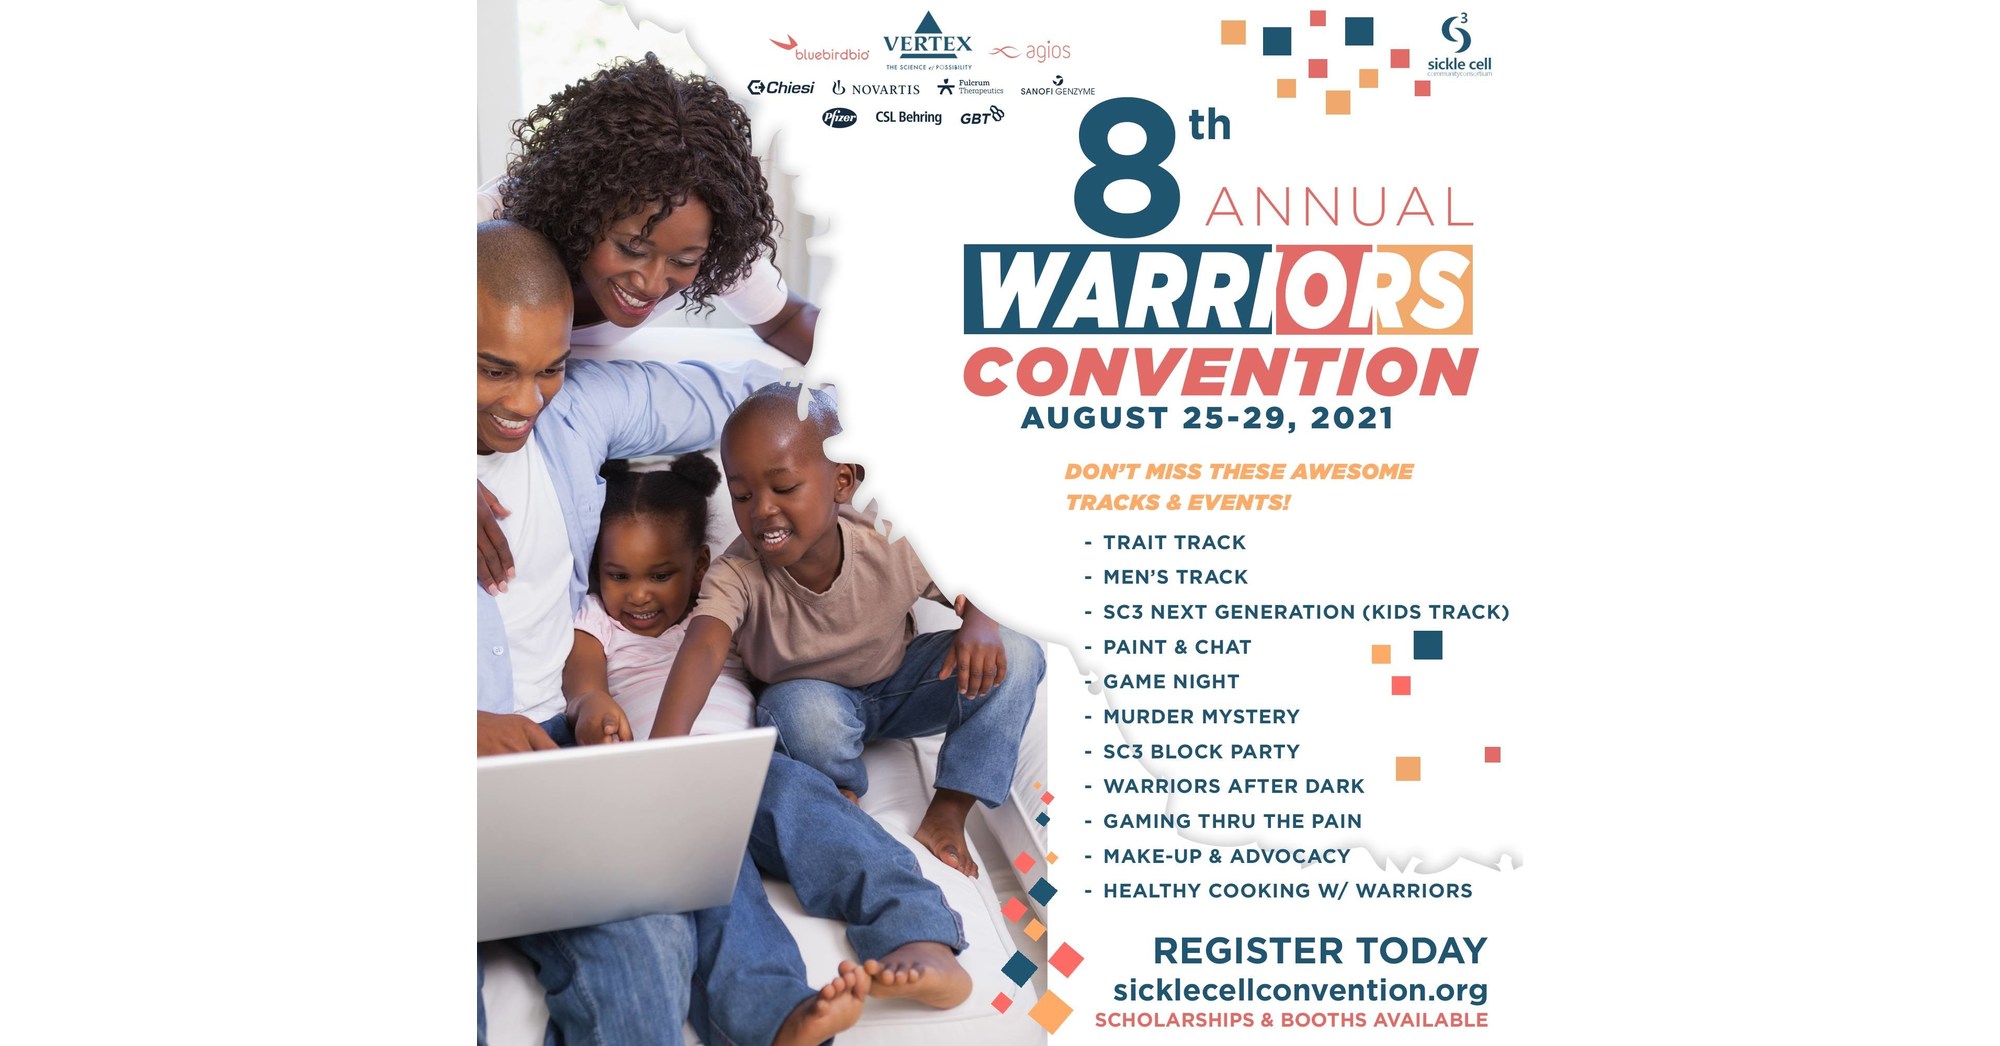 https://www.onescdvoice.com/wp-content/uploads/2021/08/8th_Annual_Warriors_Convention.jpeg 